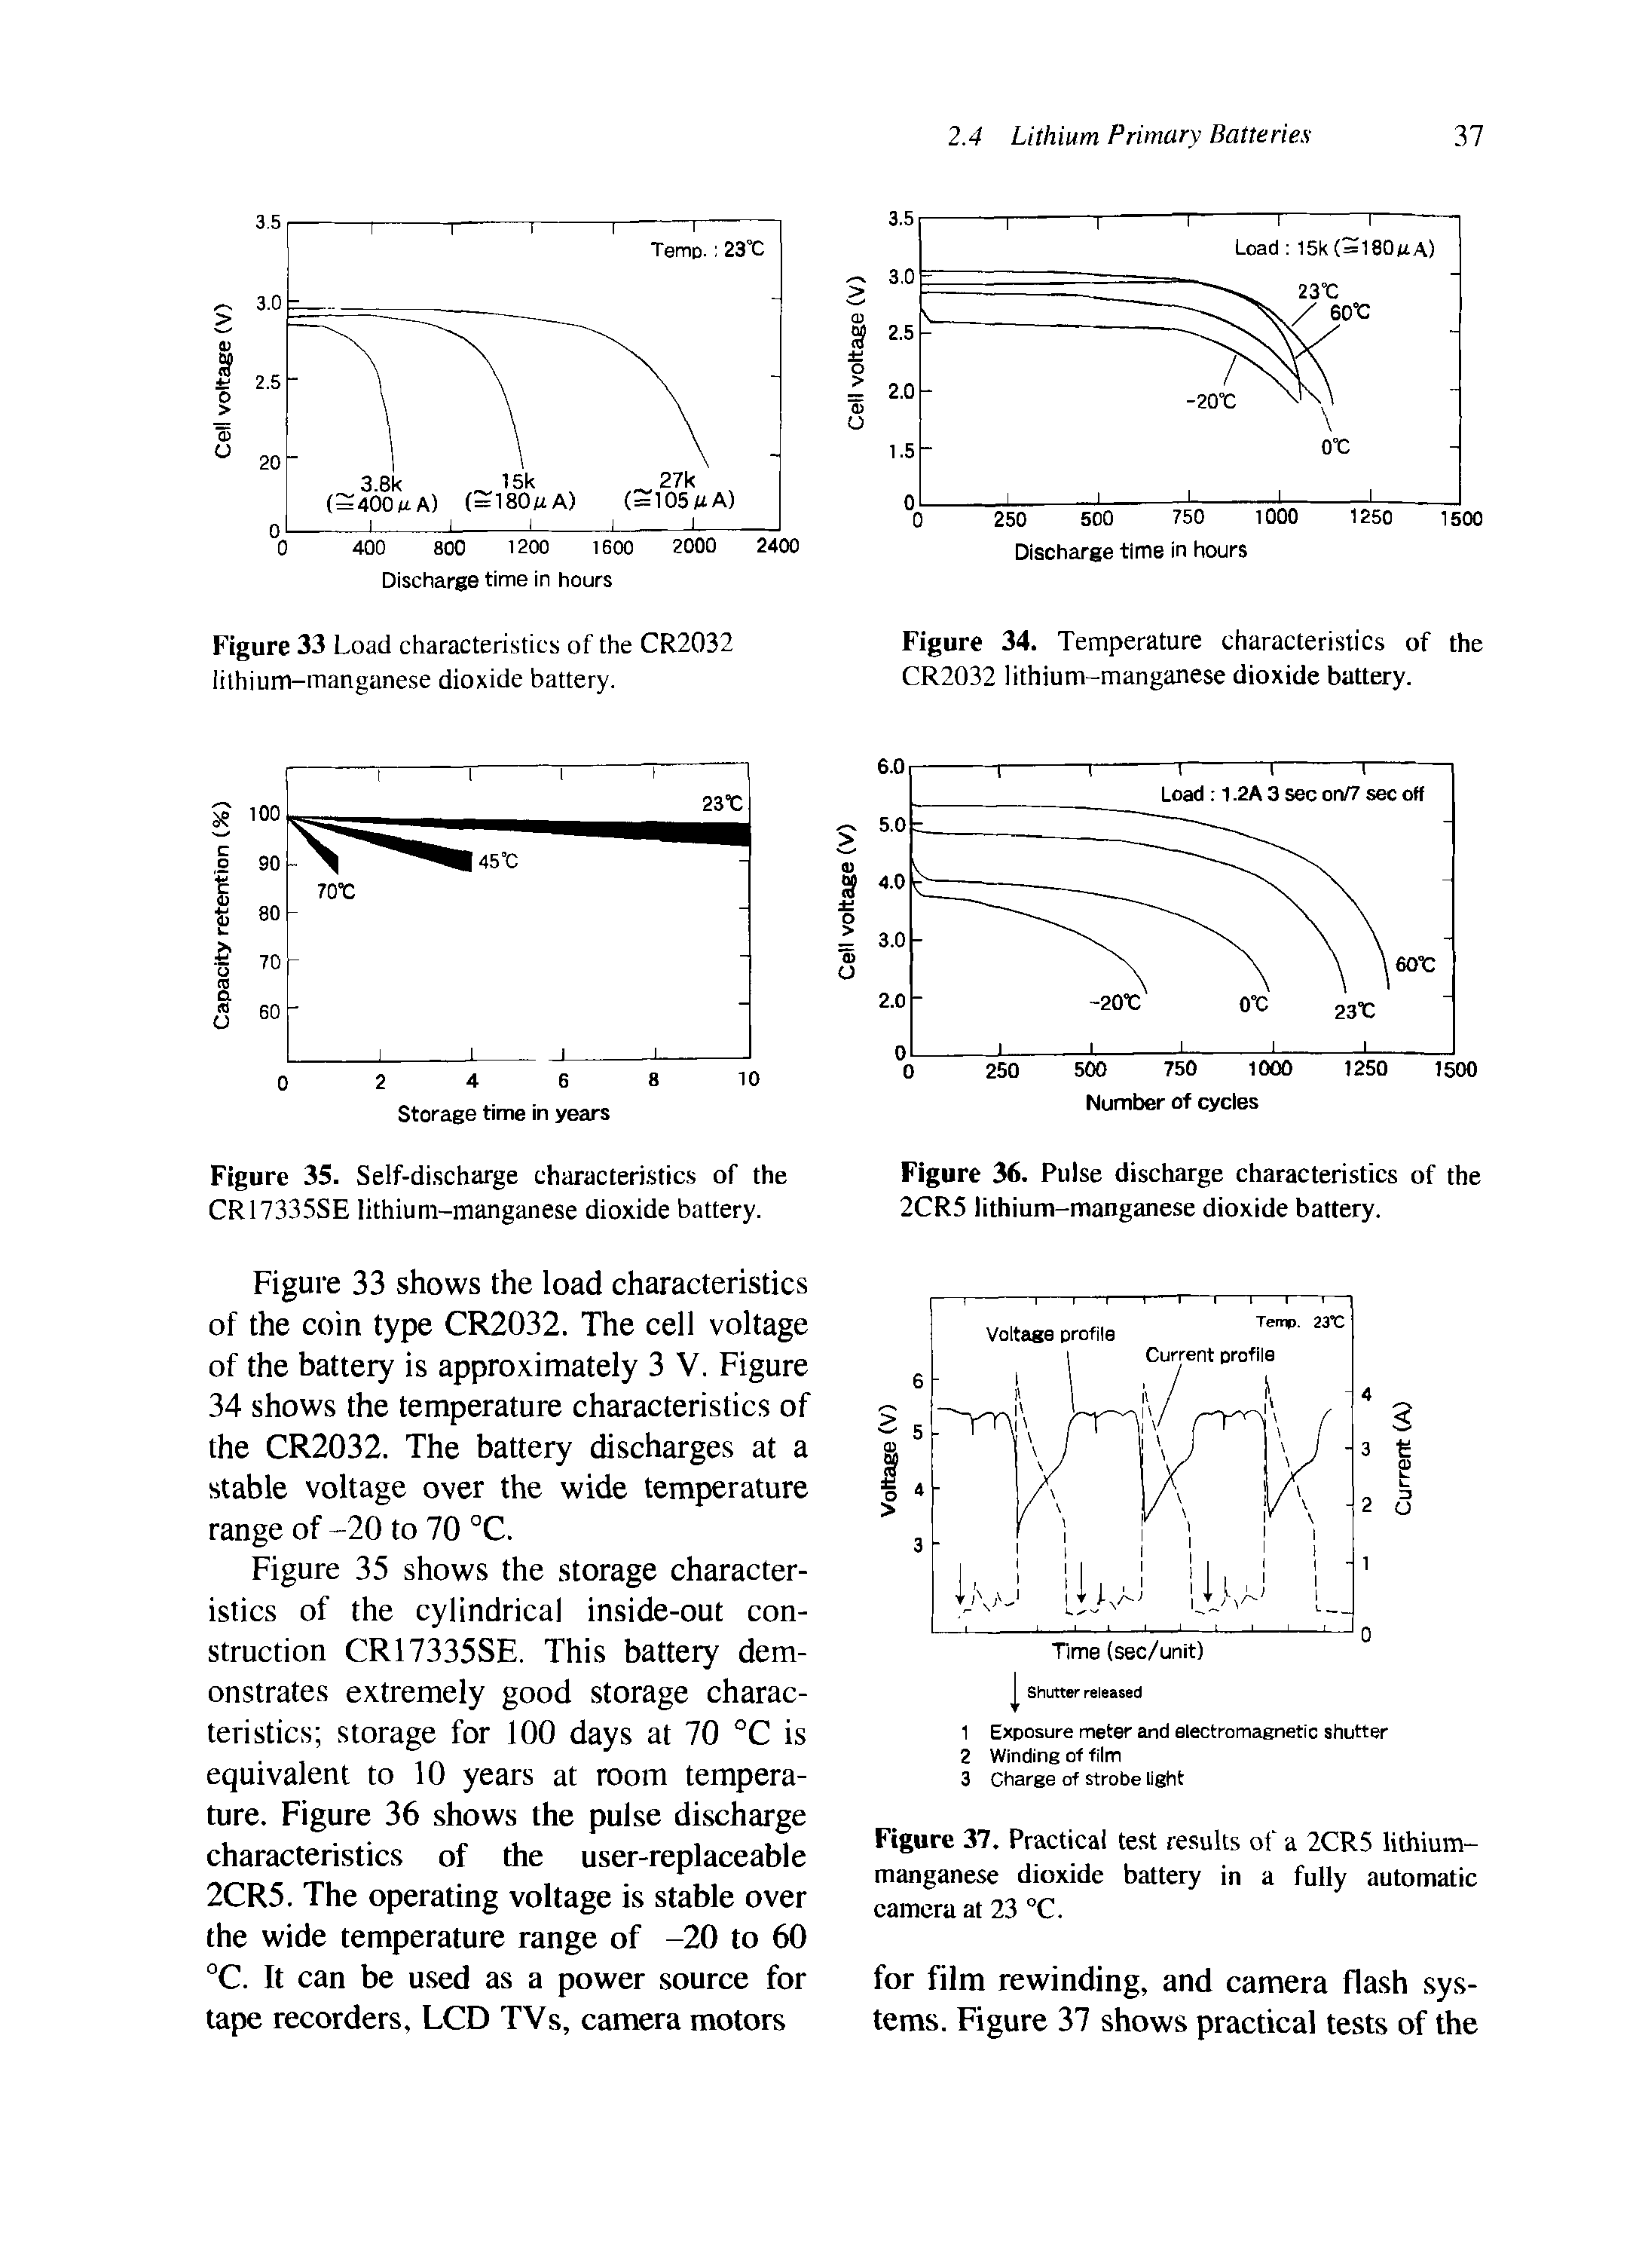 Figure 35. Self-discharge characteristics of the CR17335SE lithium-manganese dioxide battery.